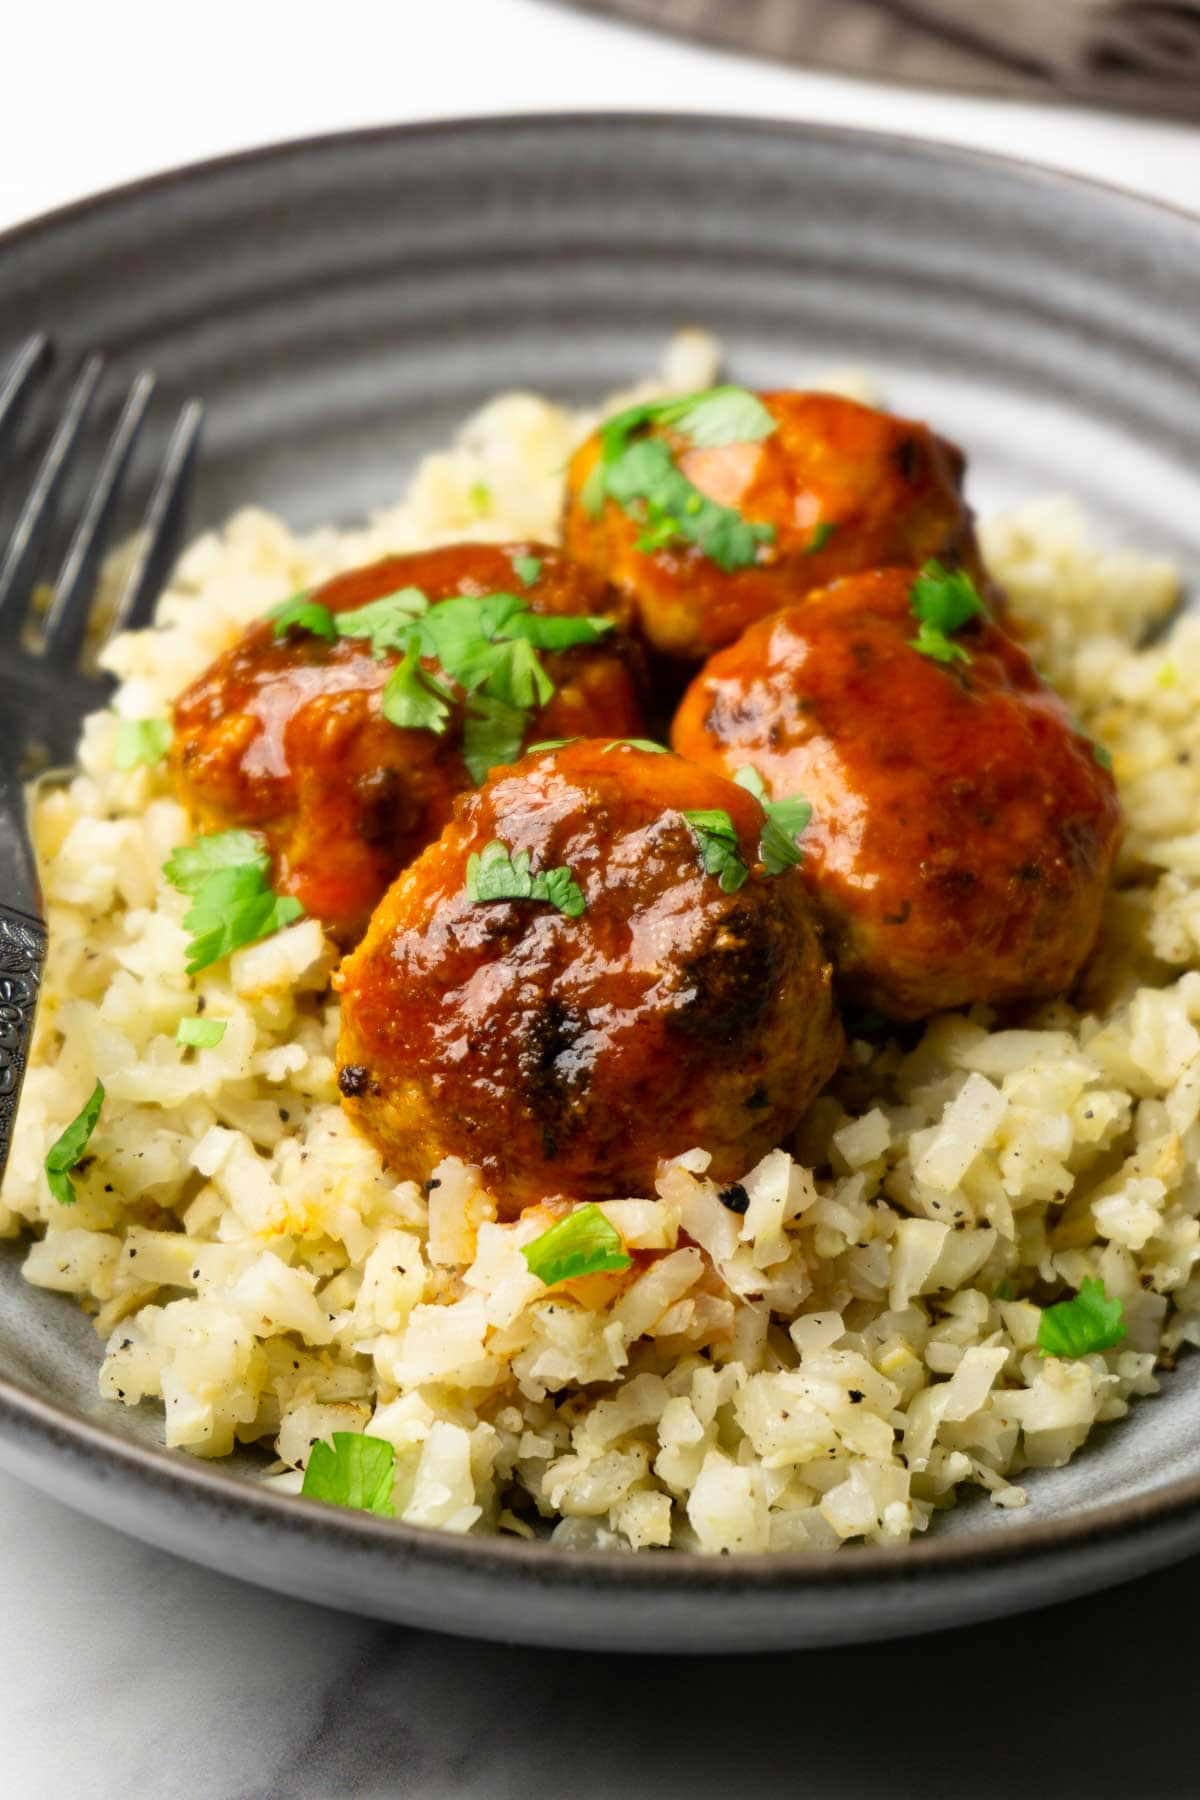 Buffalo chicken meatballs garnished with freshly chopped served on a cauliflower rice pillow in a grey bowl.